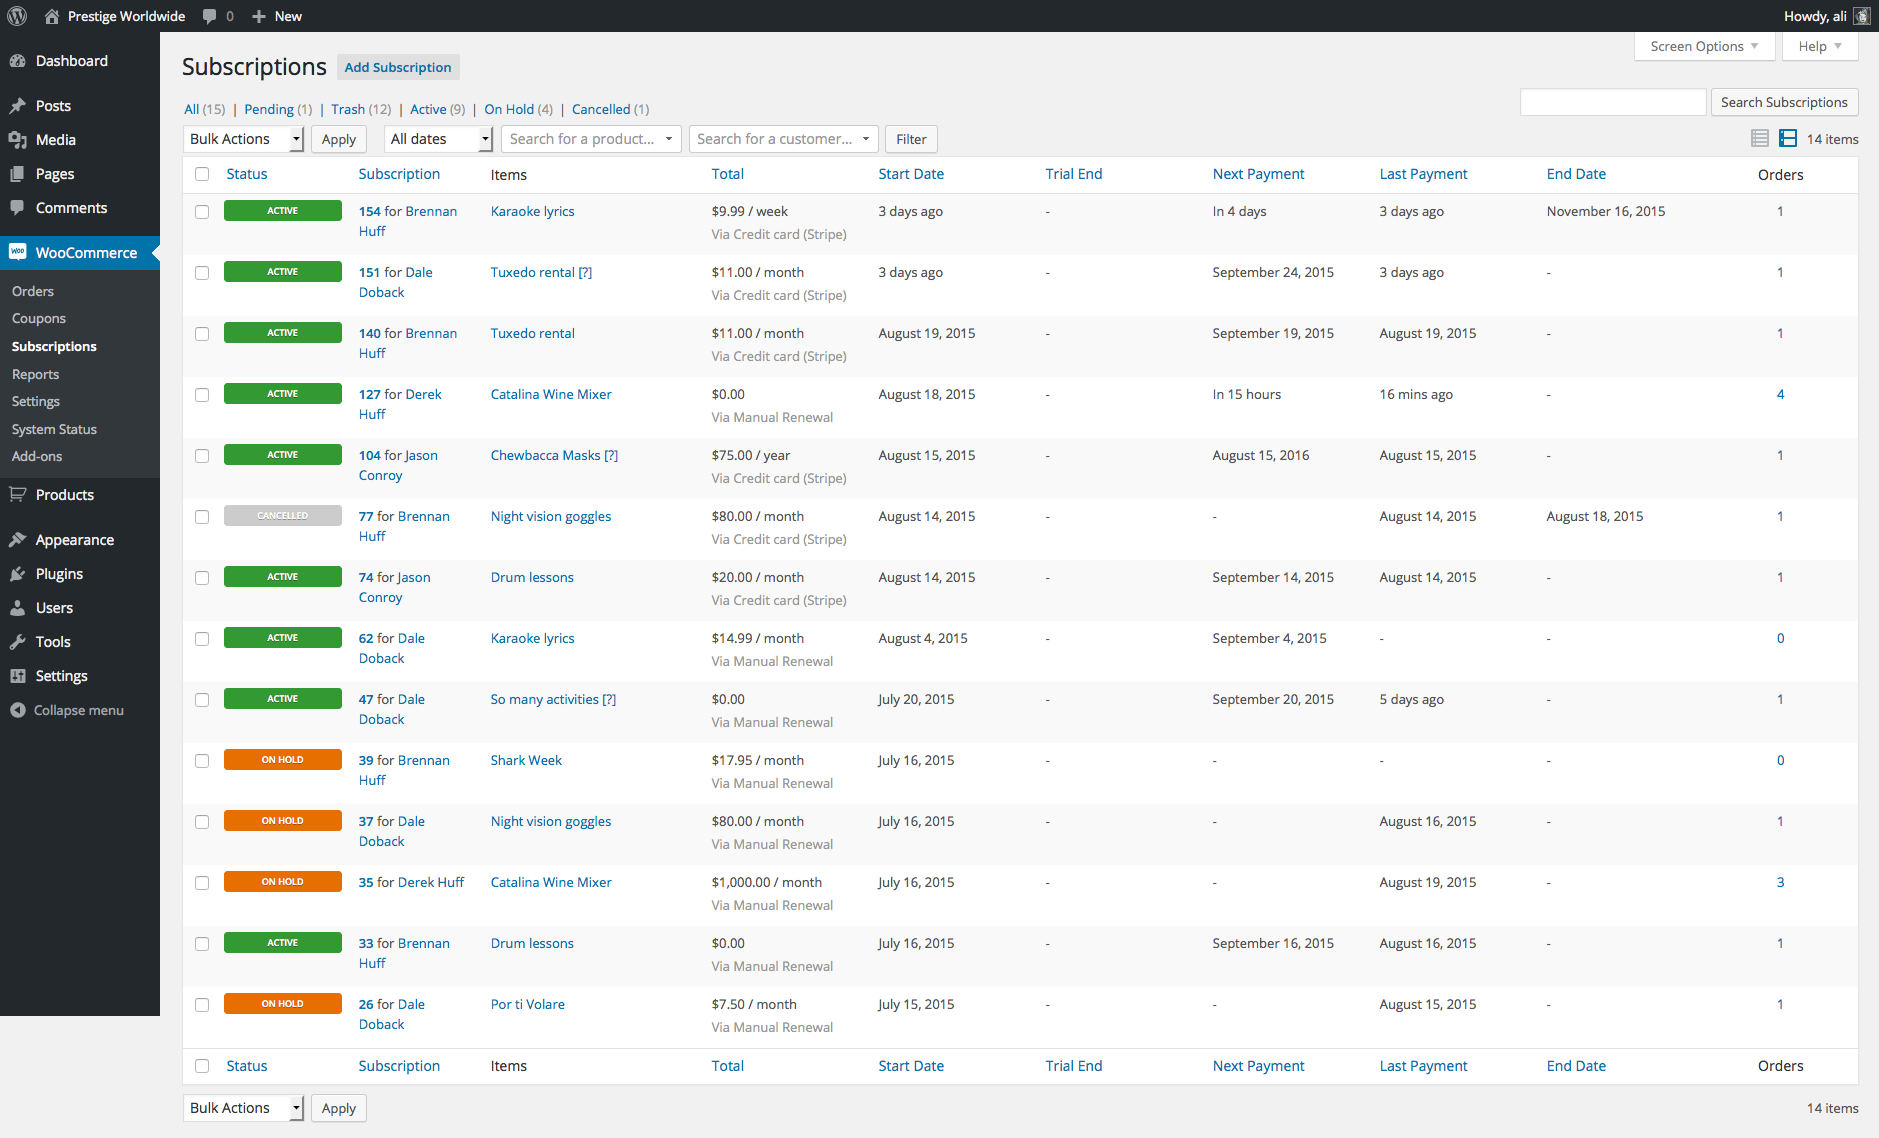 Manage Subscriptions Administration Screen